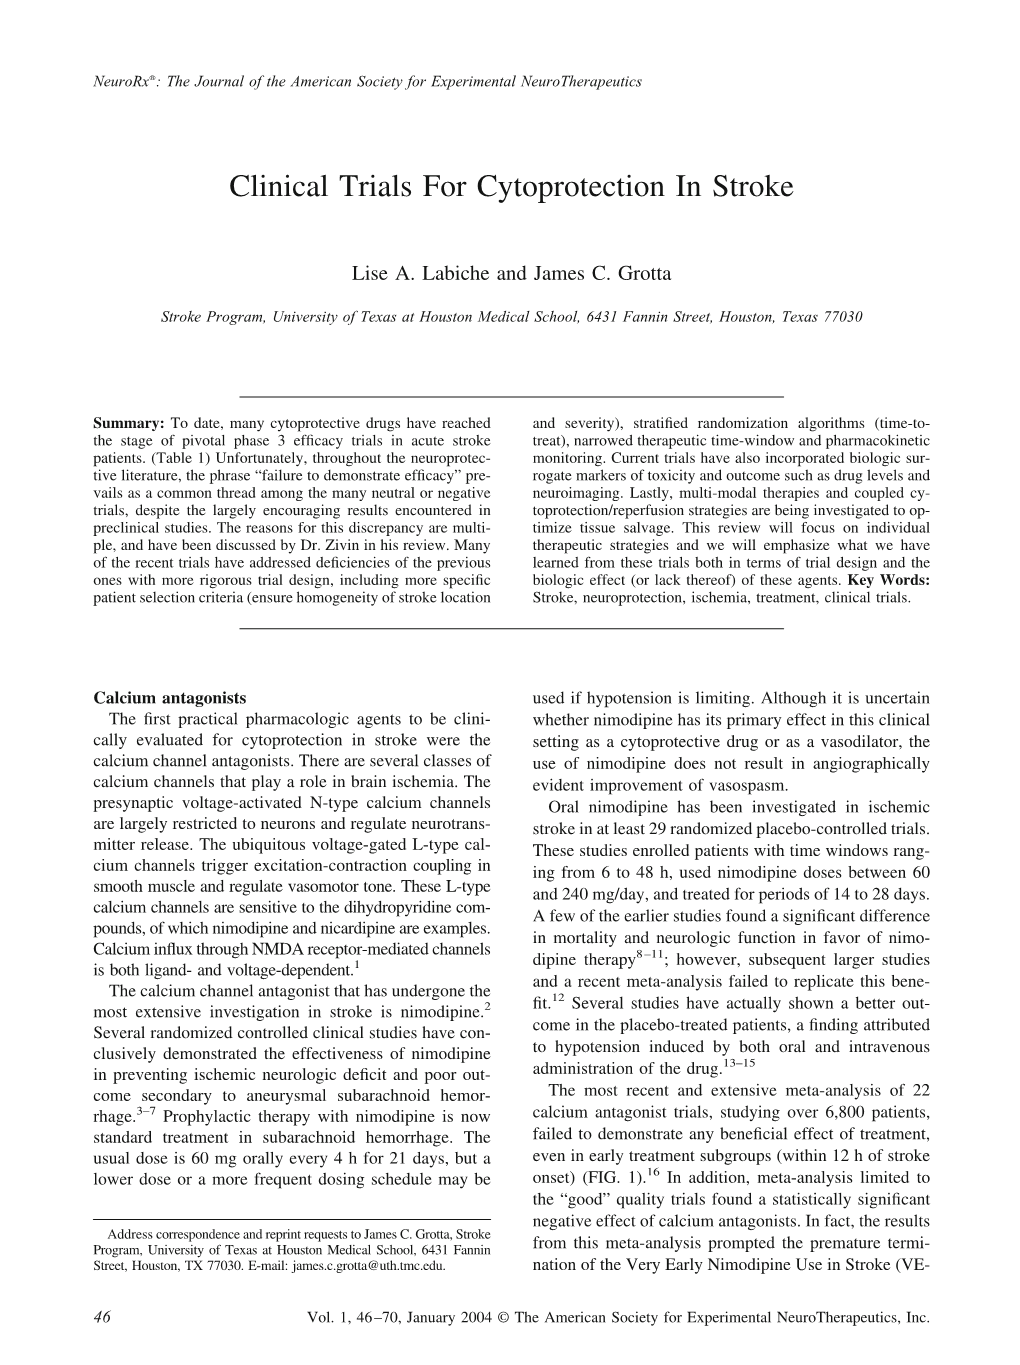 Clinical Trials for Cytoprotection in Stroke